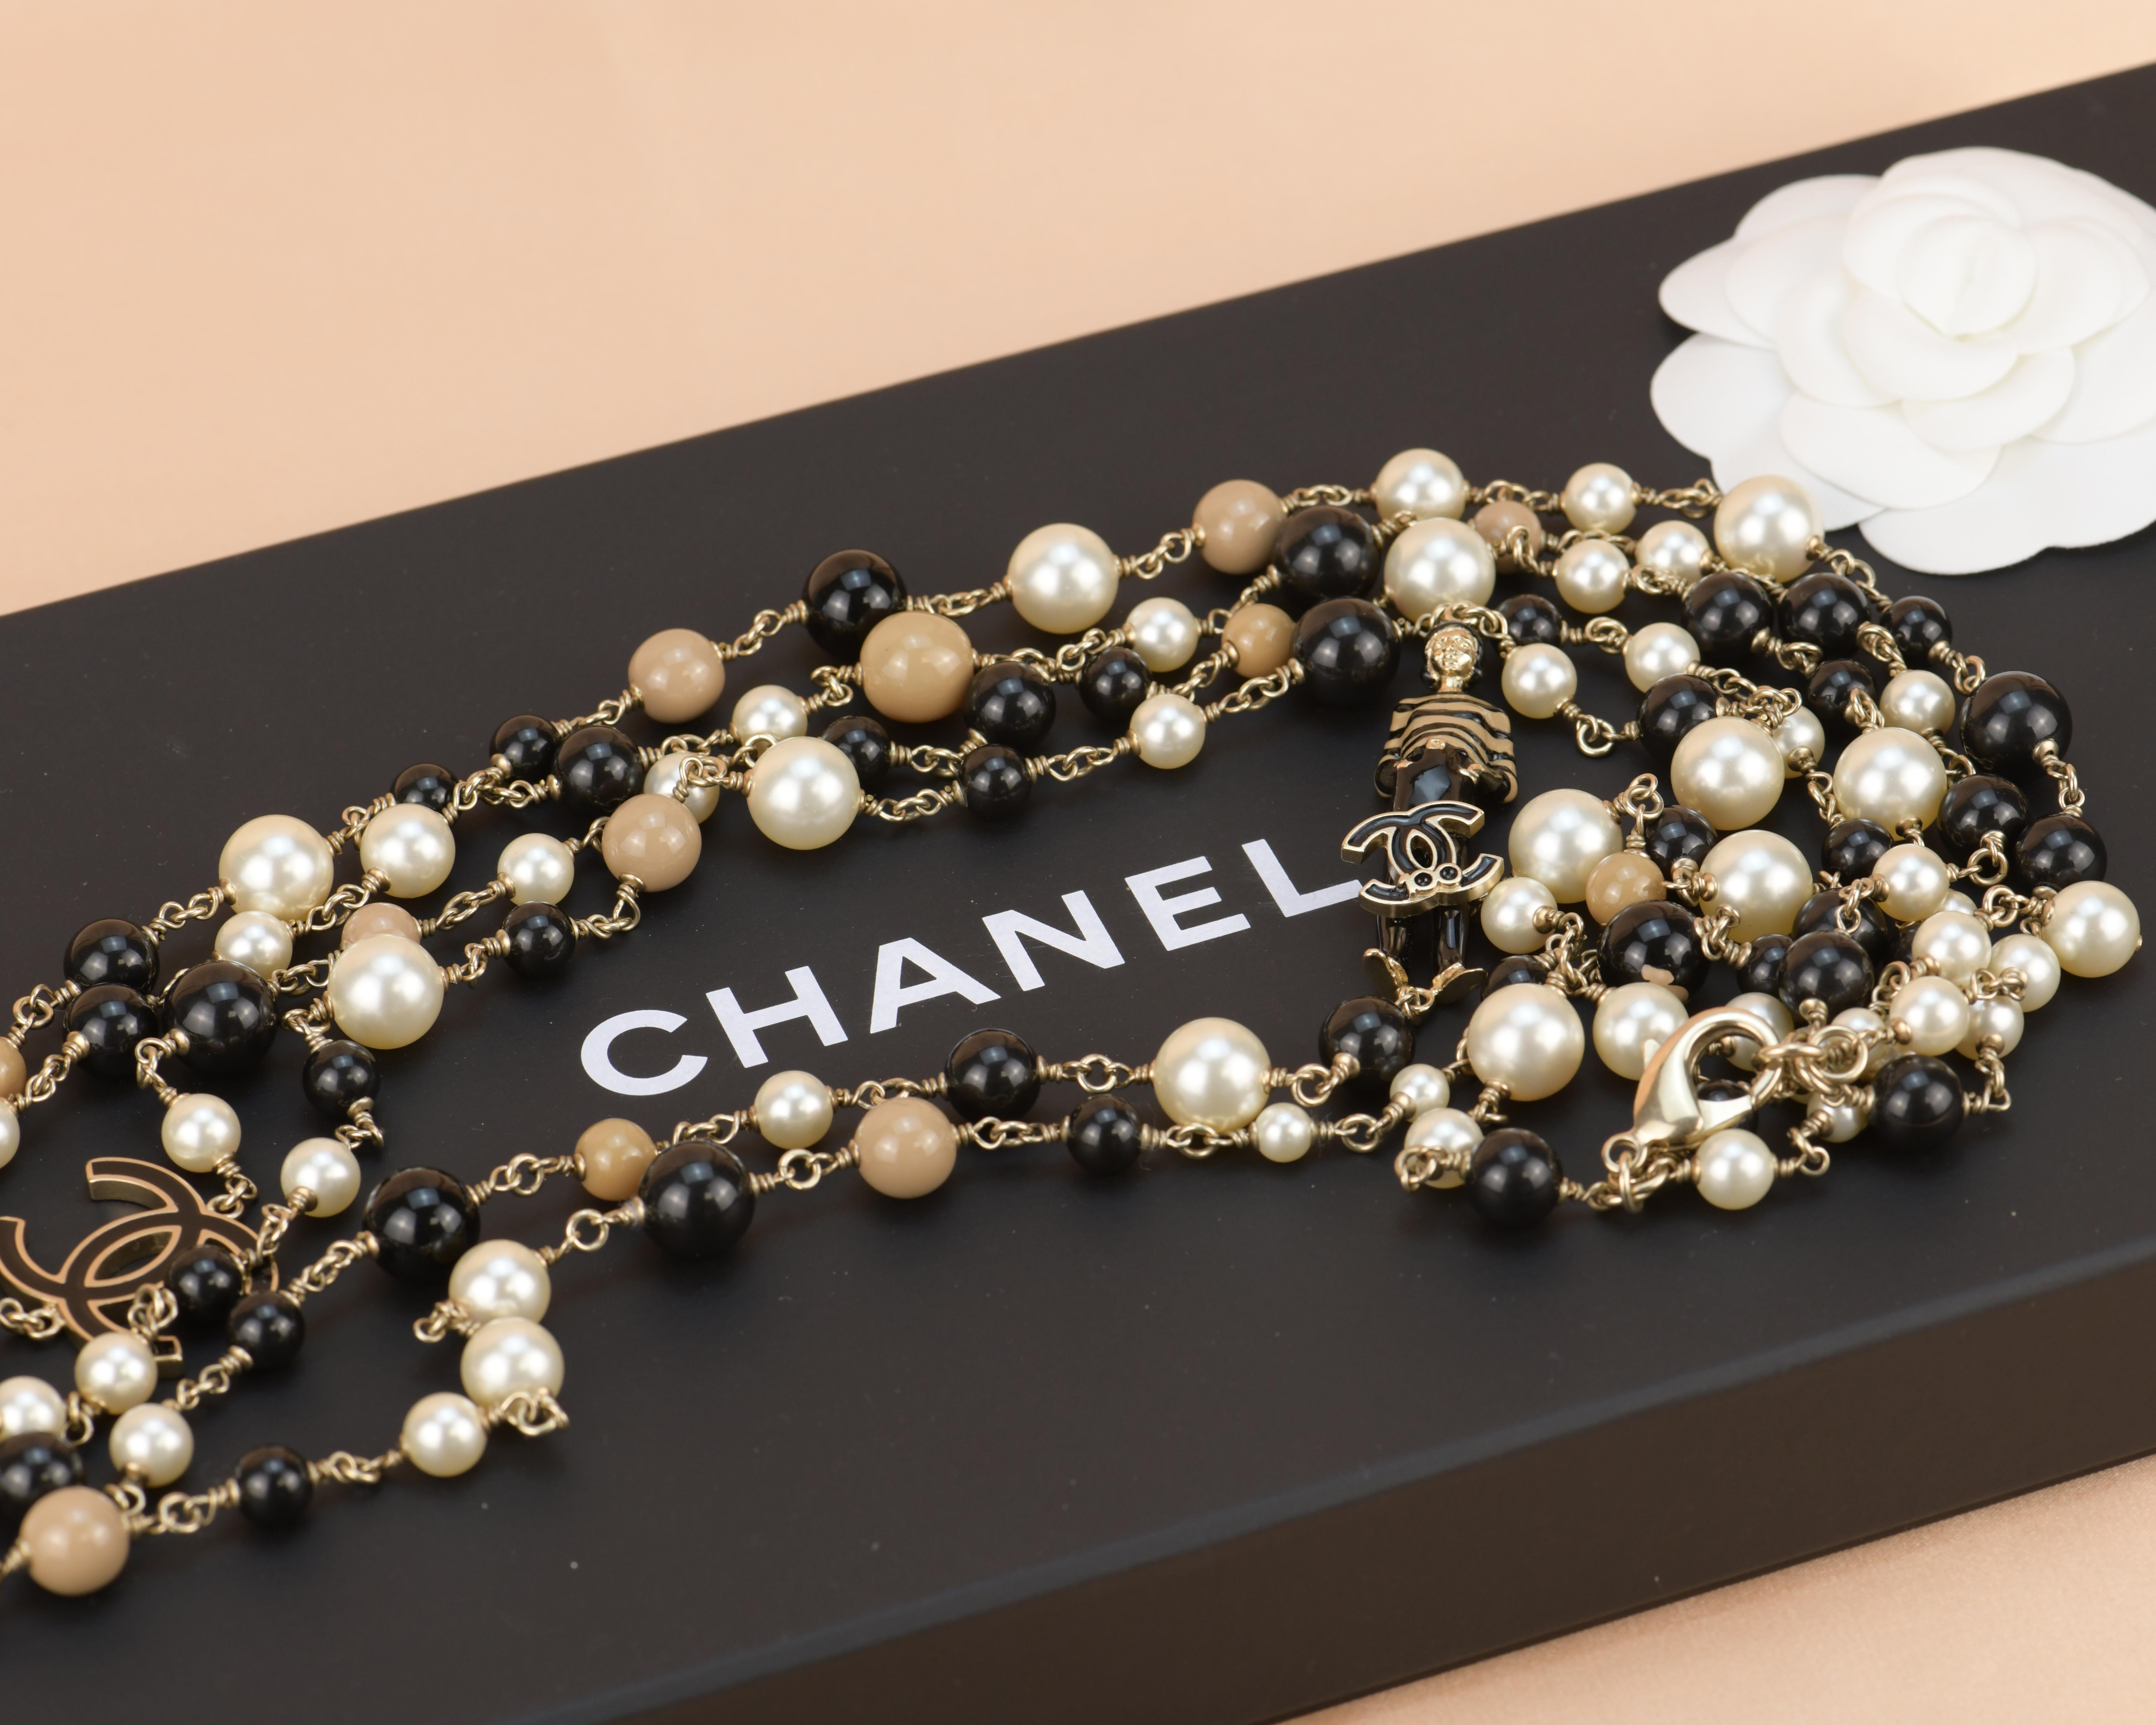 Bead Chanel CC Limited Edition Enamel Coco Mademoiselle Three Strand Pearl Necklace